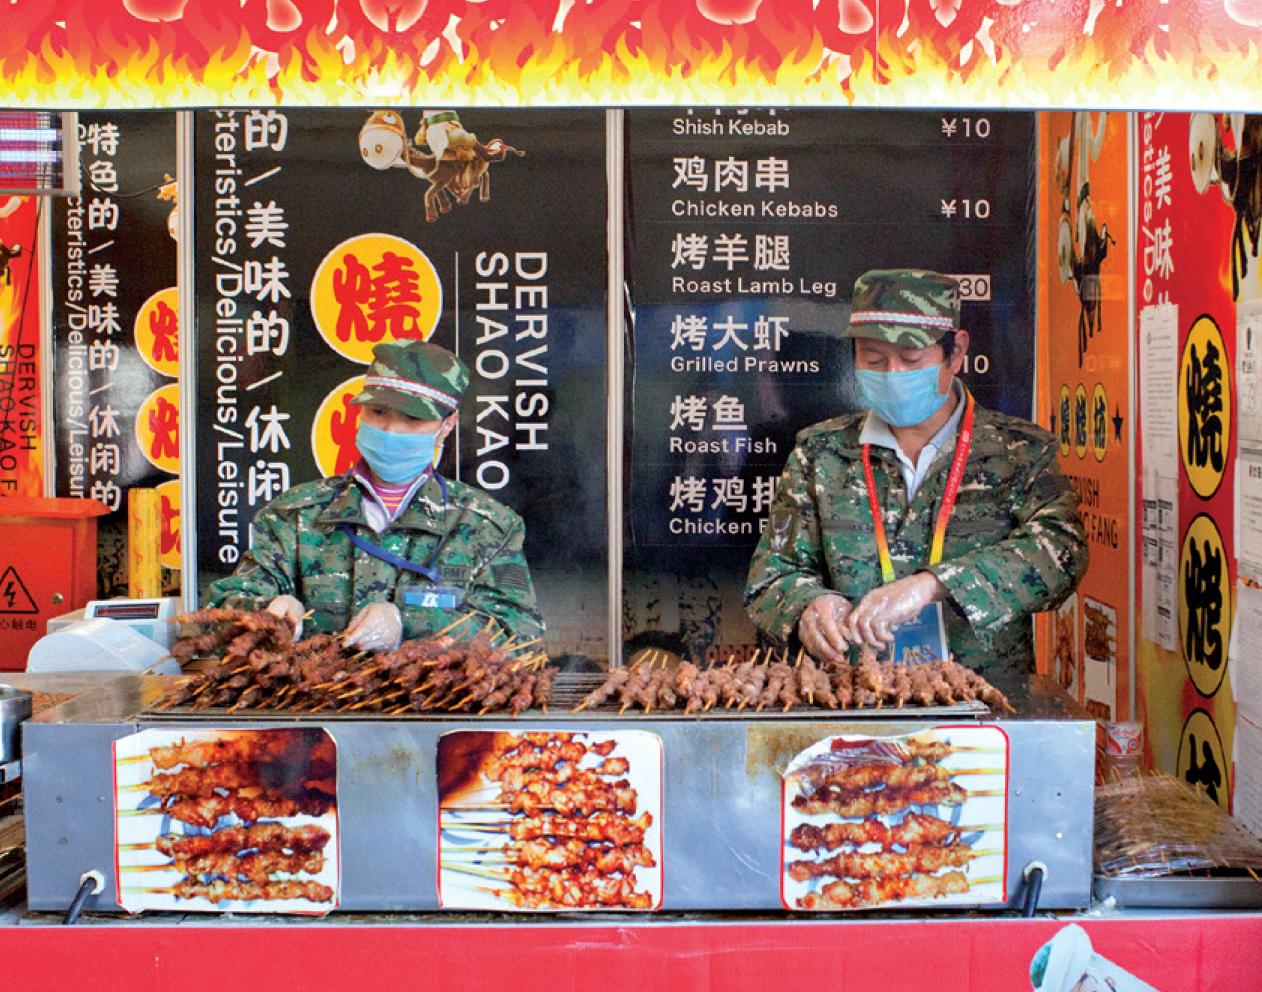 Chinese Fast Food 17 (Ed. 2/5) - Contemporary Street Photography - Orange Color Photograph by Anja Hitzenberger